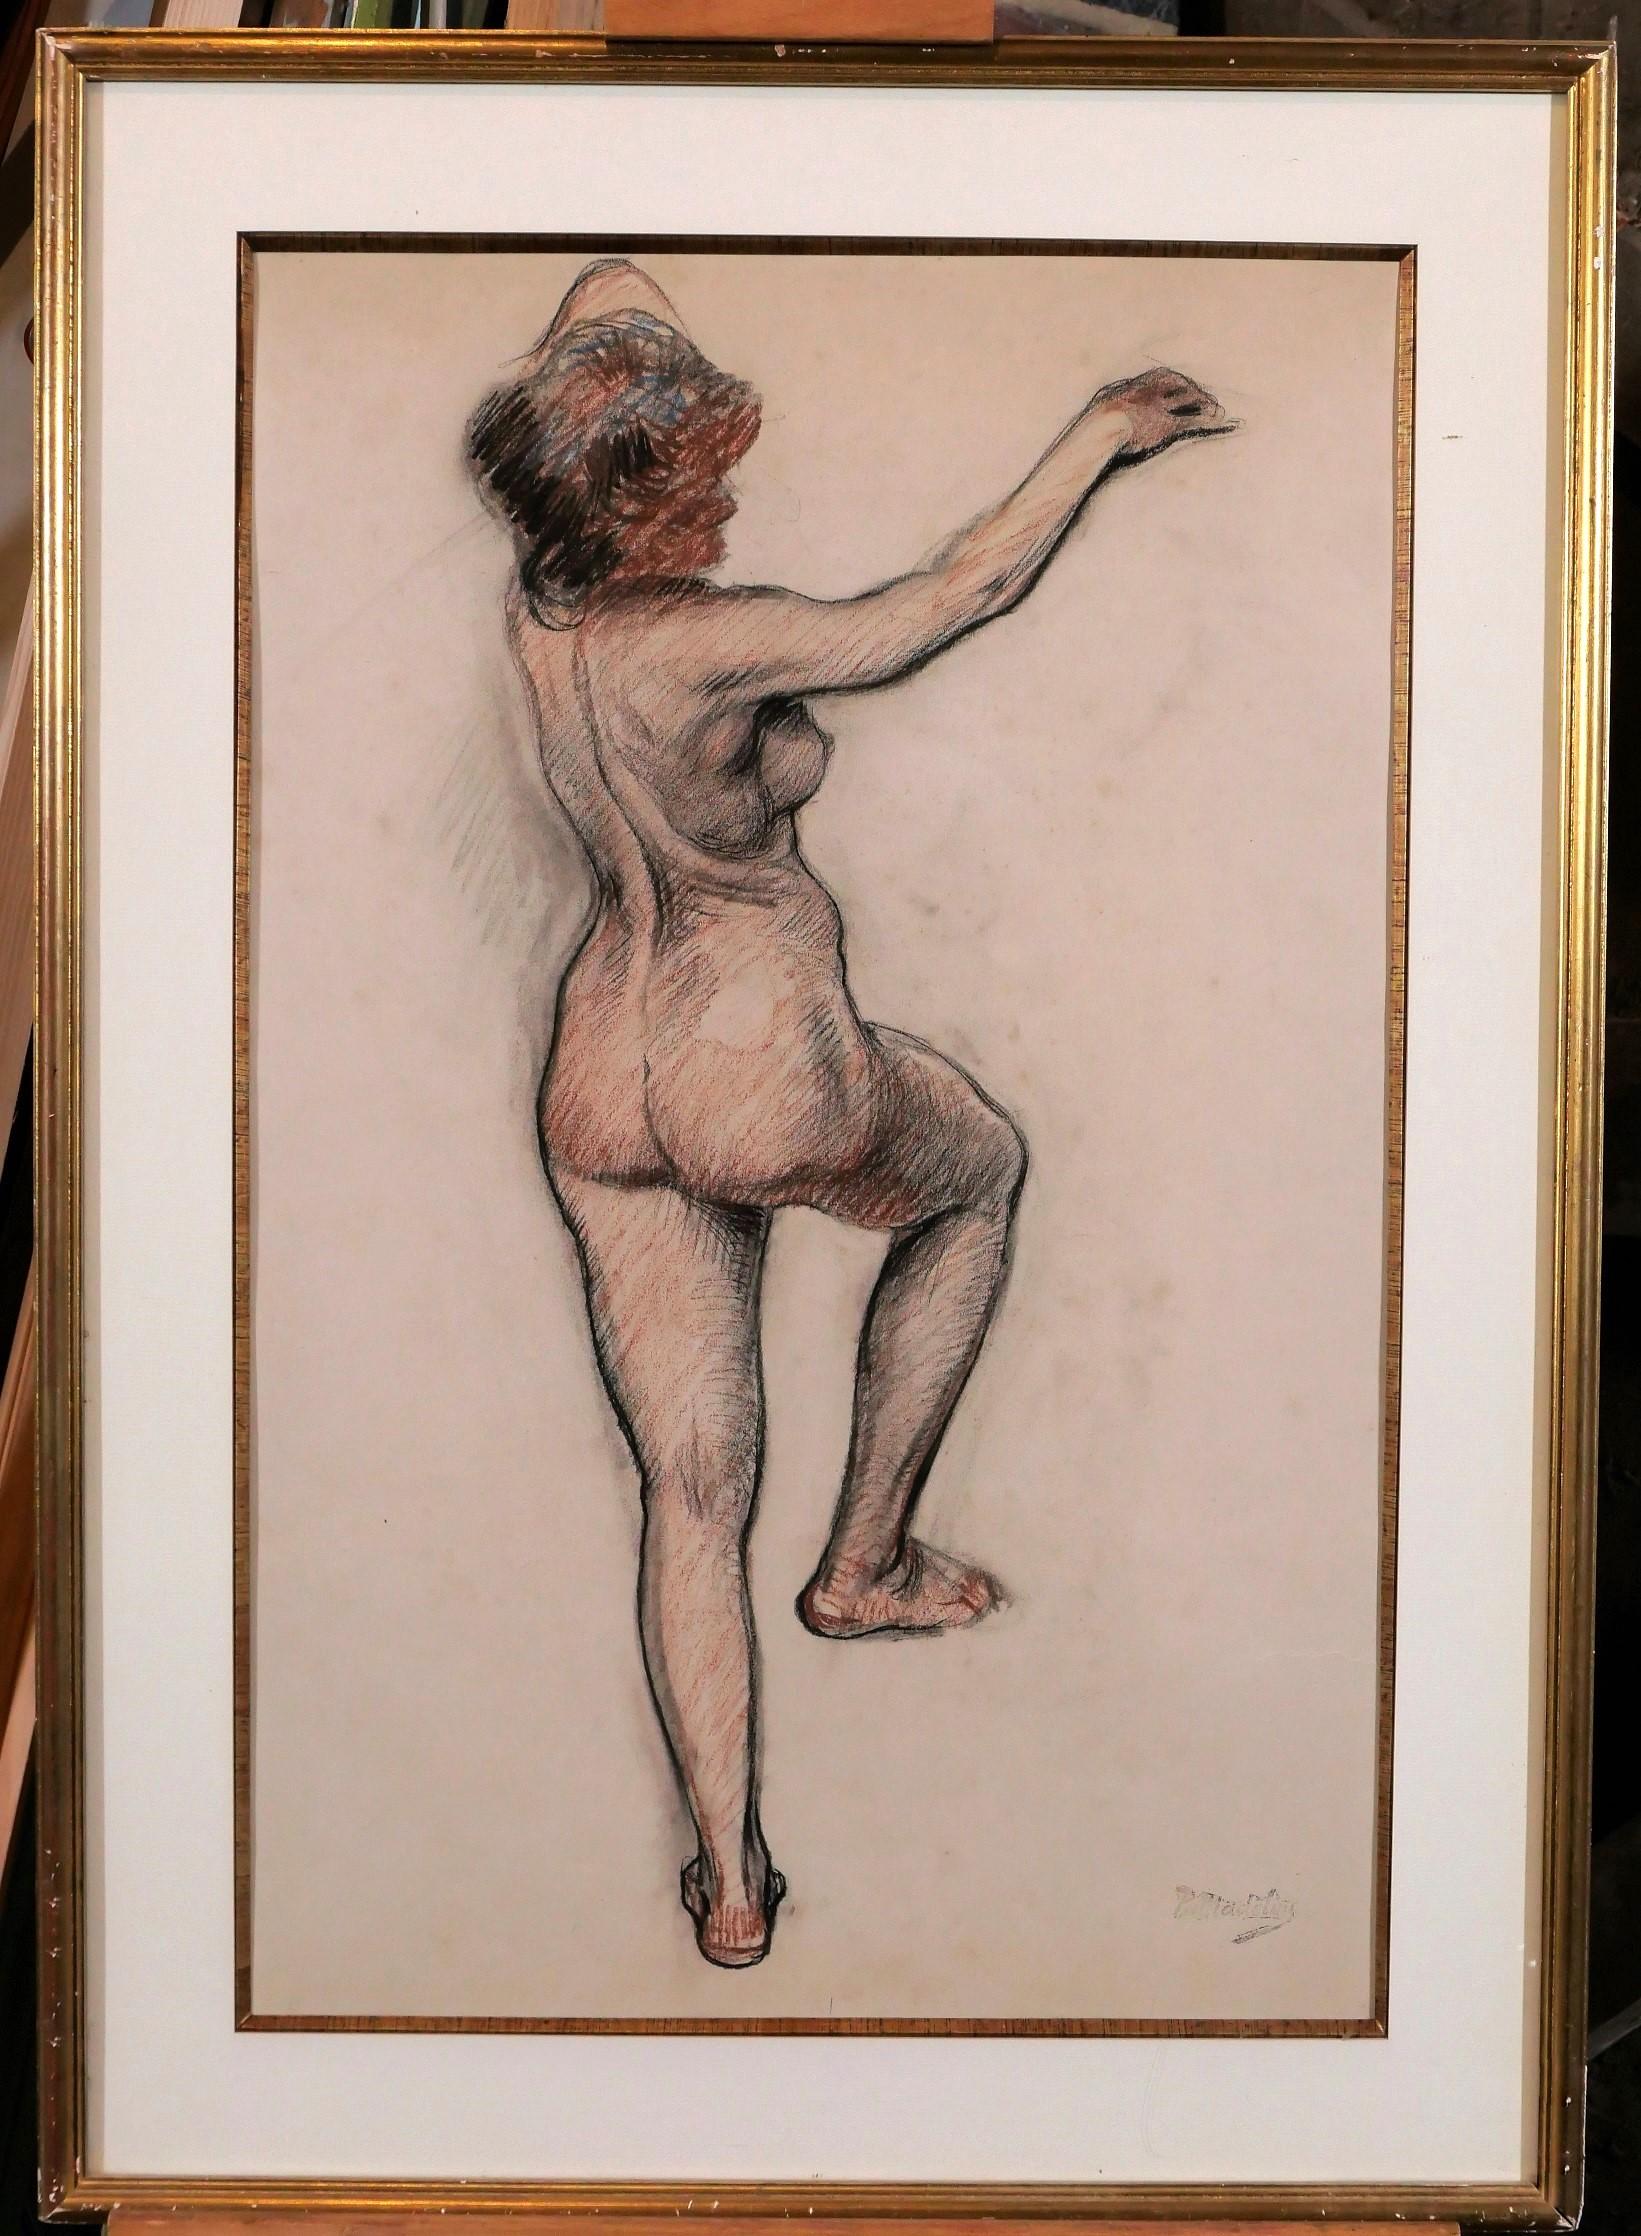 Naked woman, study - Art by Paul Madeline